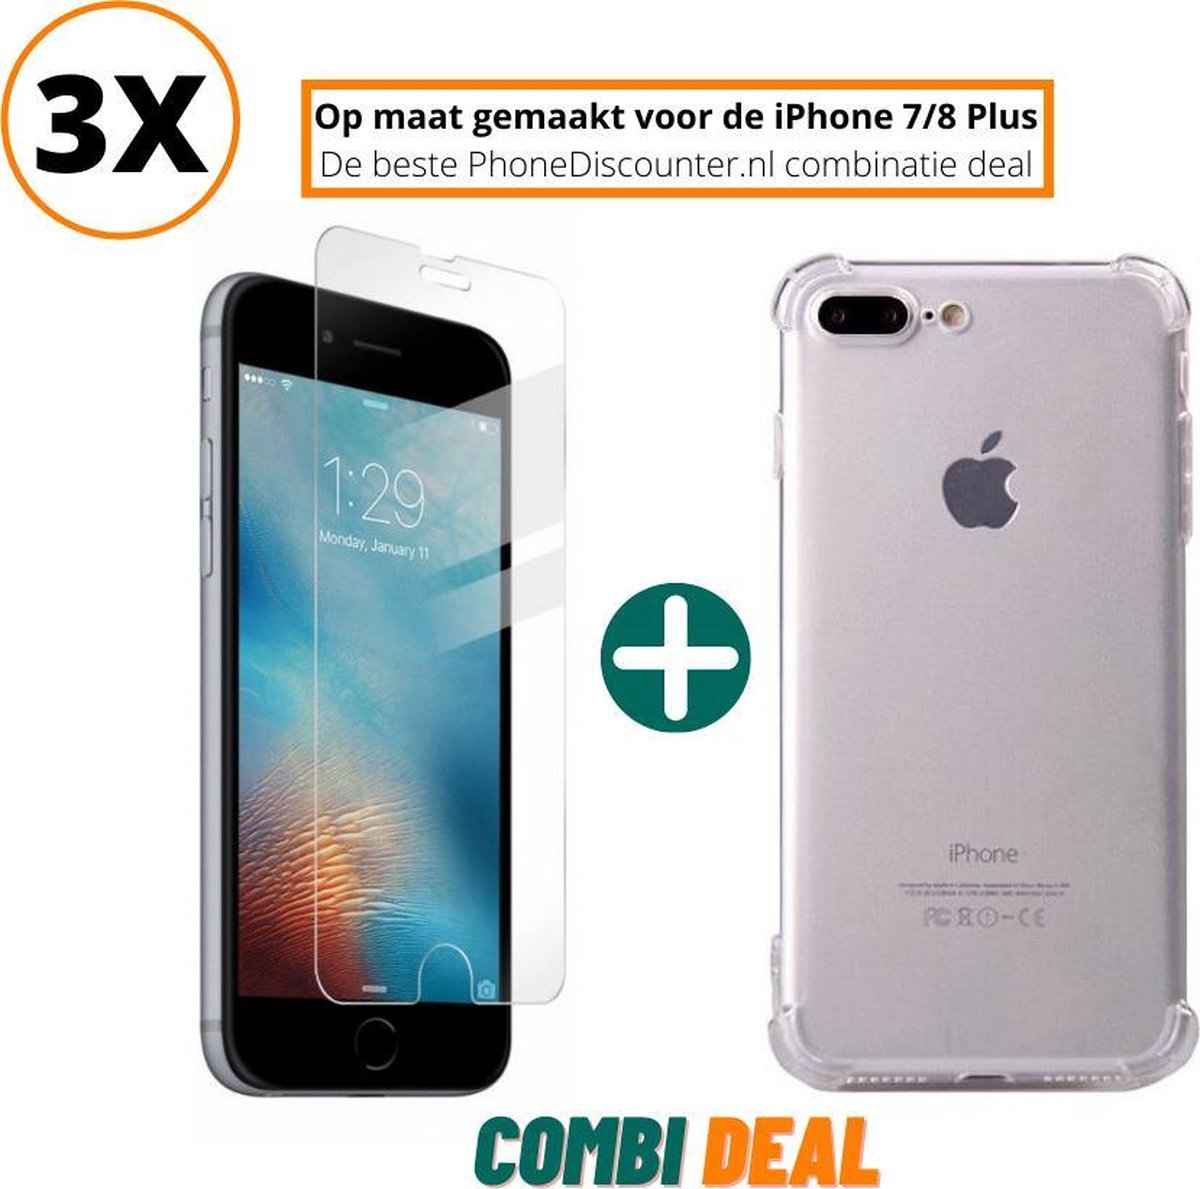 iphone 7 plus anti shock hoes | iPhone 7 Plus A1784 siliconen case 3x | iPhone 7 Plus anti shock case transparant | 3x beschermhoes iphone 7 plus apple | iPhone 7 Plus schokbestendige hoes + 3x iPhone 7 Plus tempered glass screenprotector